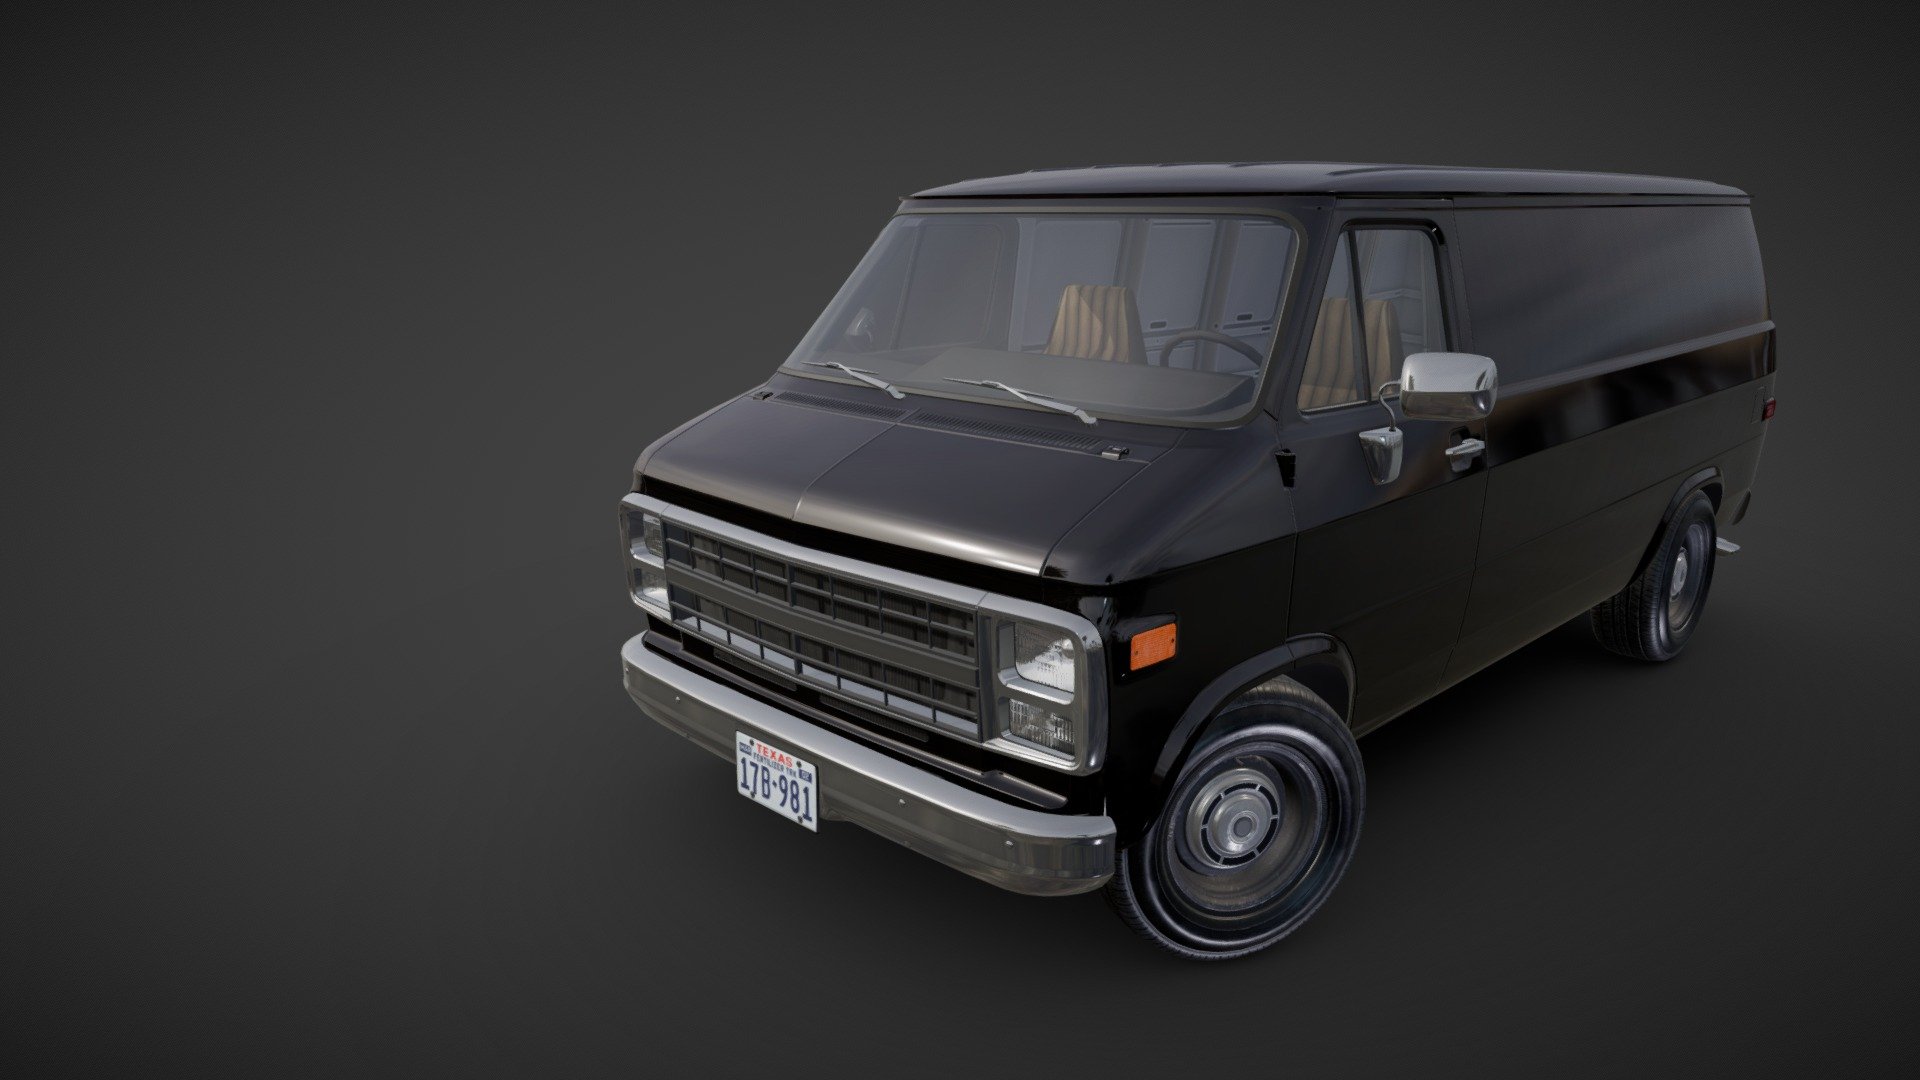 High accuracy industrial van model. Clean topology. Low poly interior with diffuse map (van_interior.jpeg 1024x1024). Midpoly body with UV. Lowpoly wheels with PBR maps(van_wheel_Base_Color.png van_wheel_Metallic.png van_wheel_Normal.png van_wheel_Roughness.png - 2048x2048). Lenght 5.01m , width 1.965m , height 1.94m. Wheels - 9000 tris Interior - 2 475 tris Model - 44259 tris Model ready for real-time apps, games, virtual reality and augmented reality 3d model